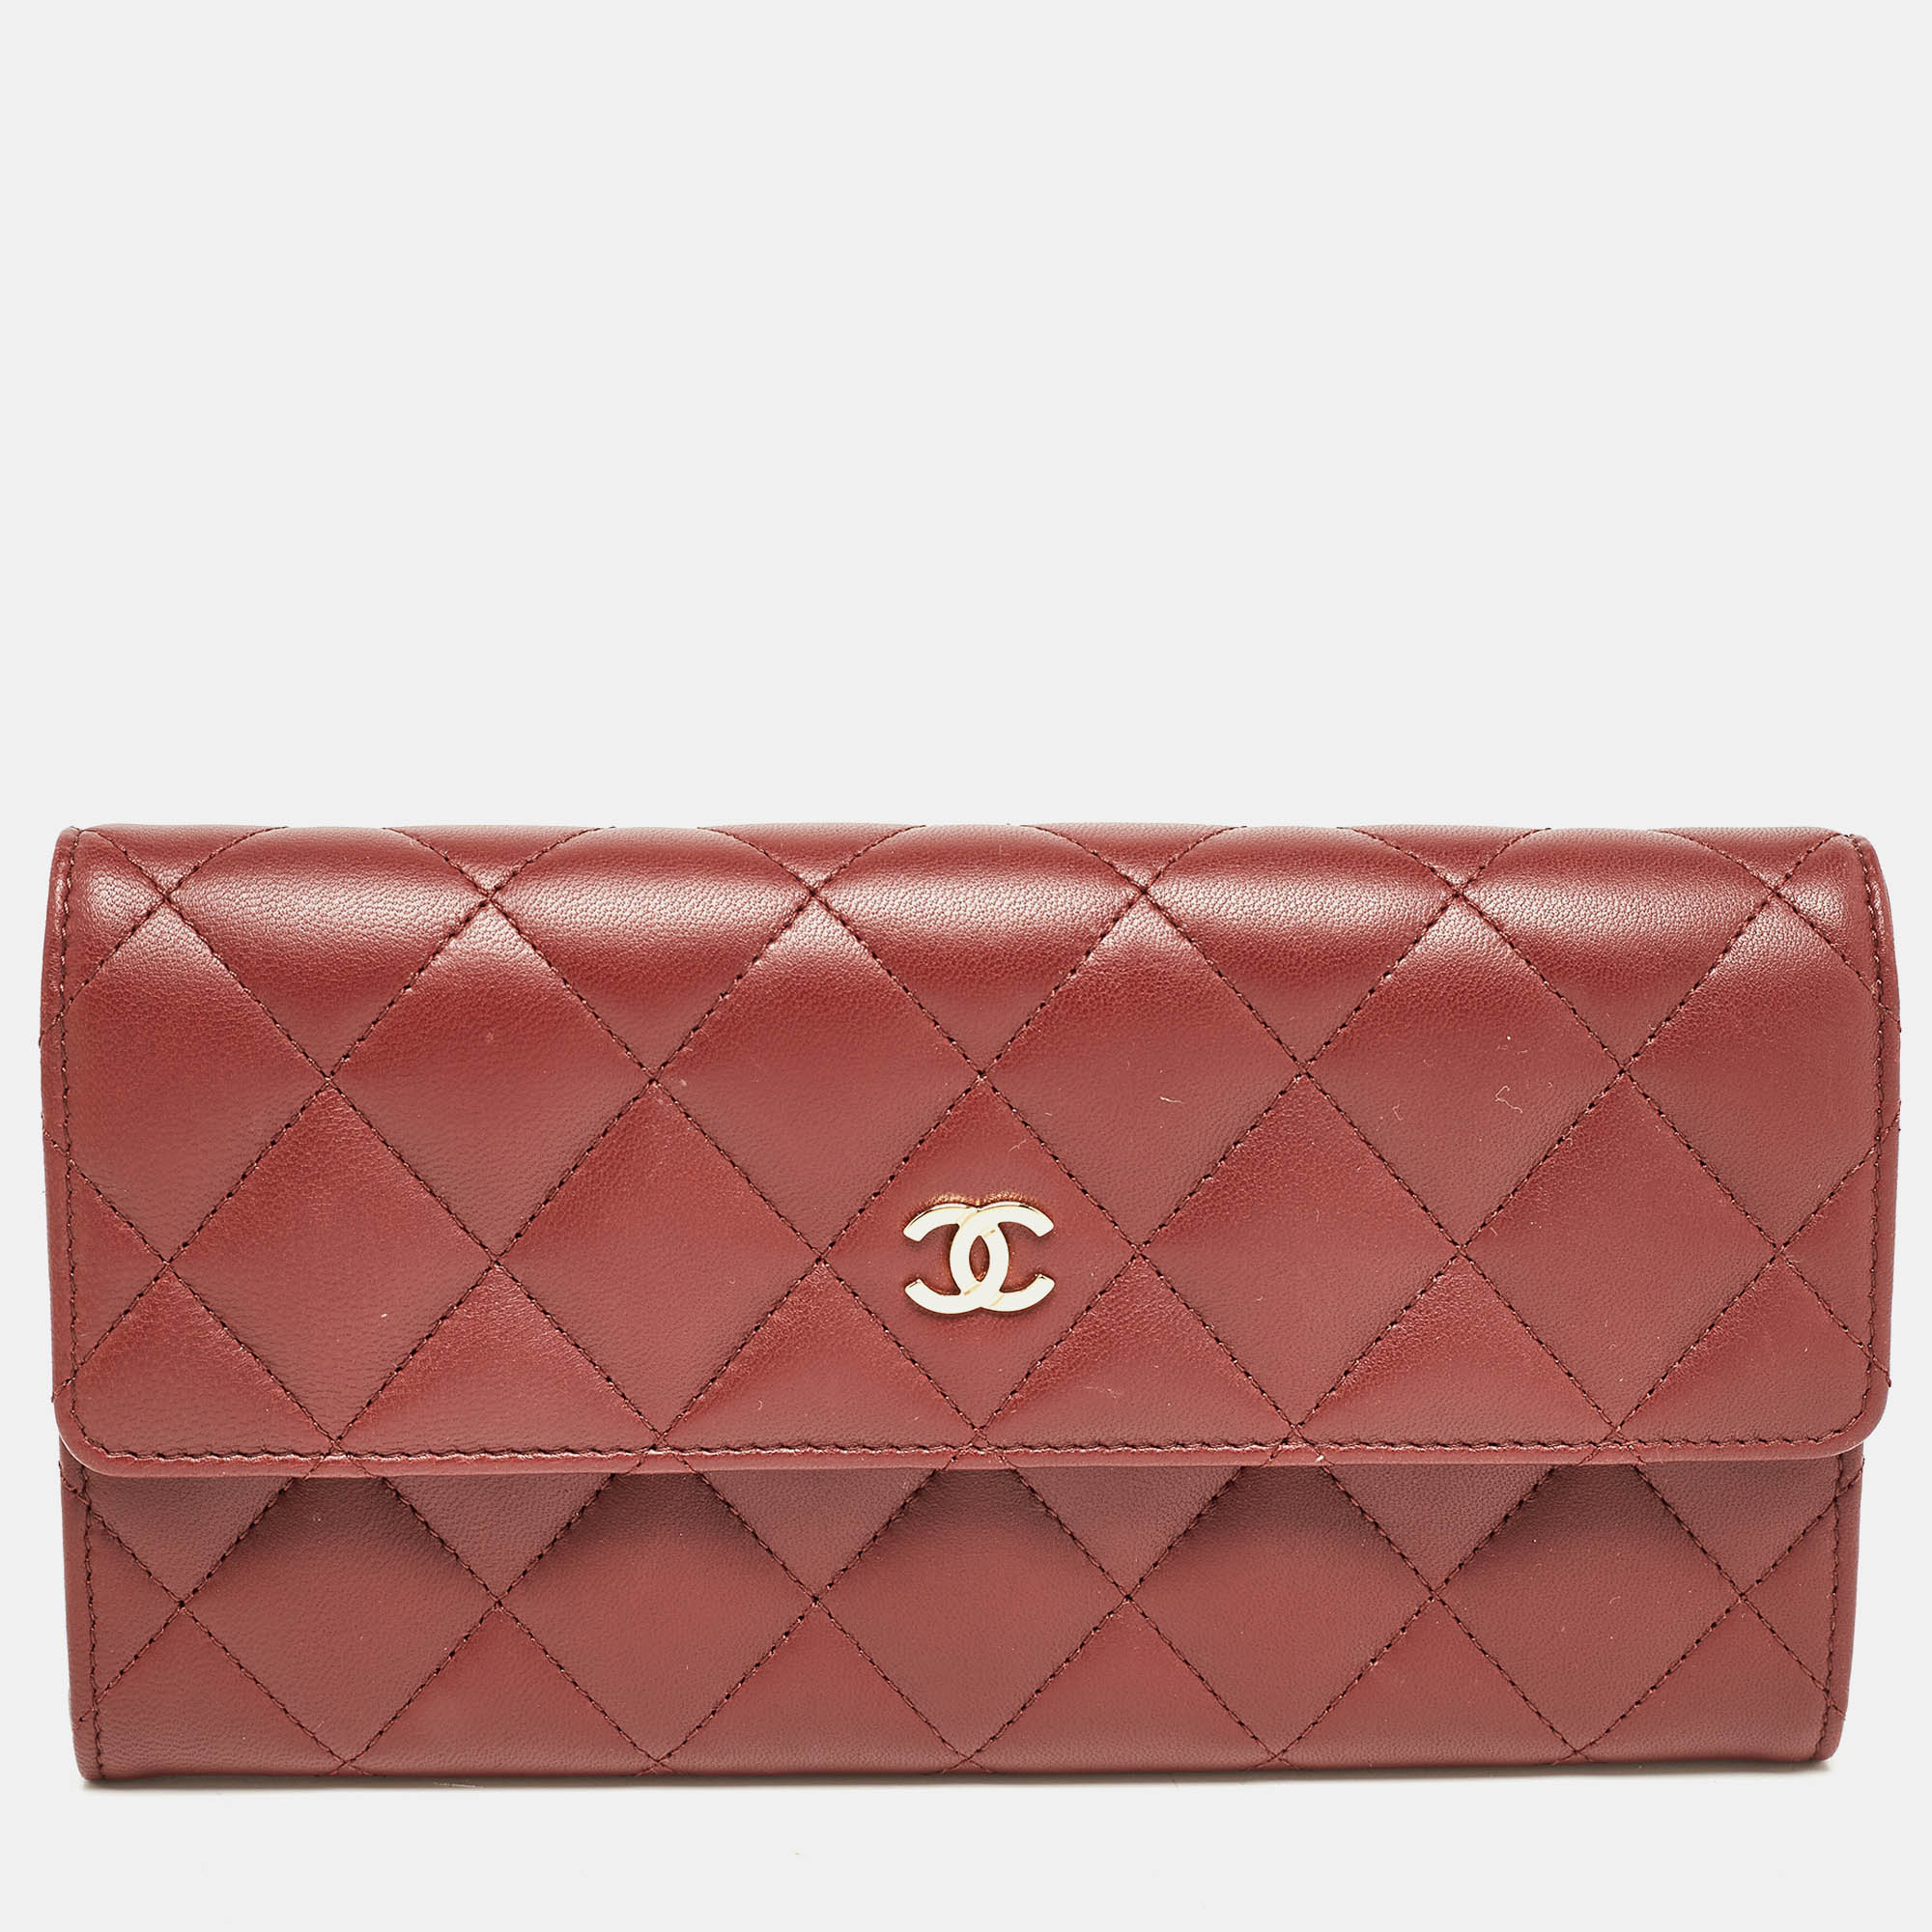 Chanel Red Quilted Leather CC Flap Wallet